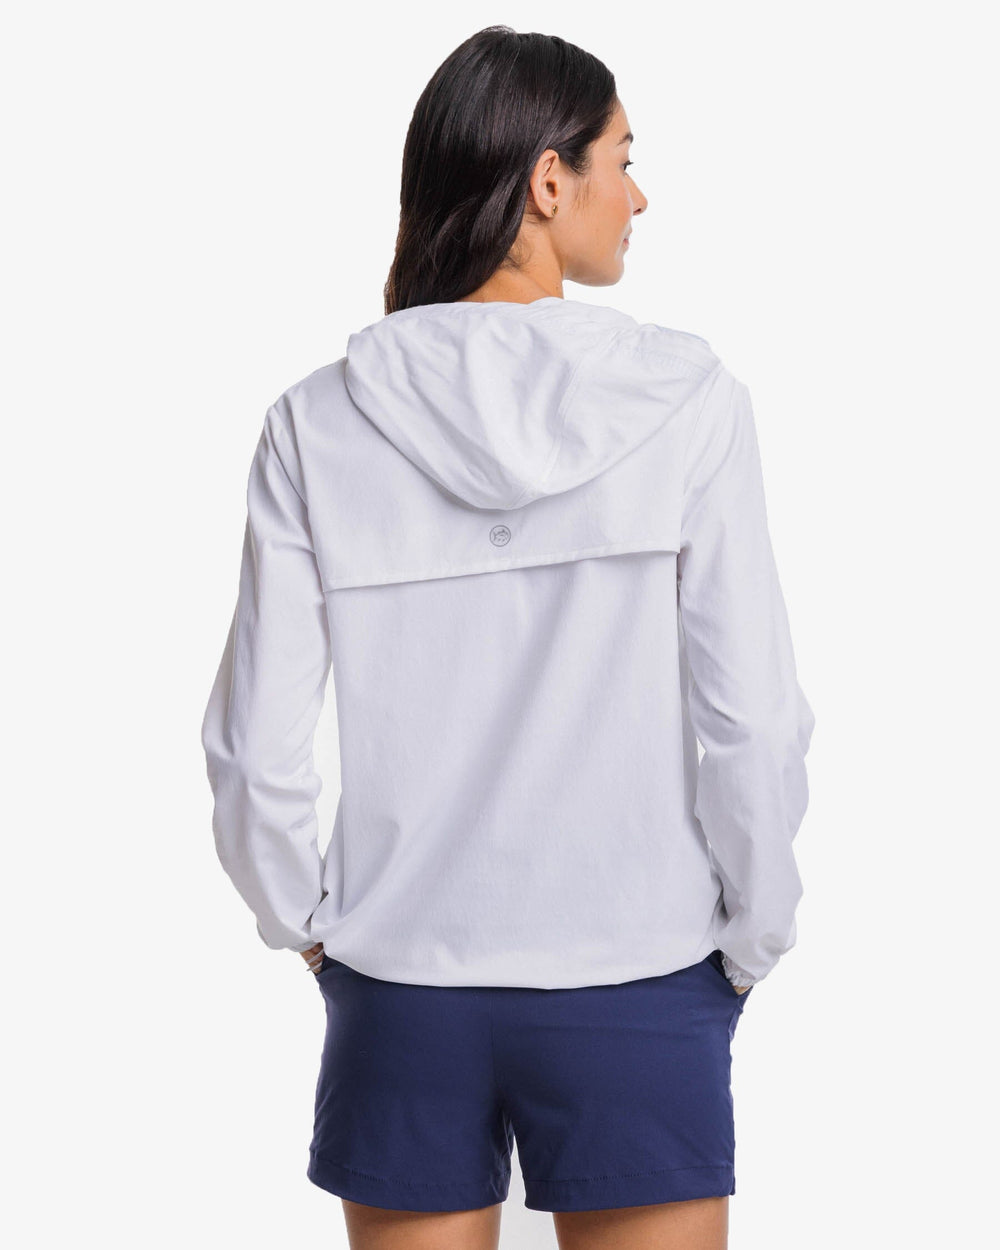 The back view of the Southern Tide Calie Pop Placket Popover by Southern Tide - Classic White